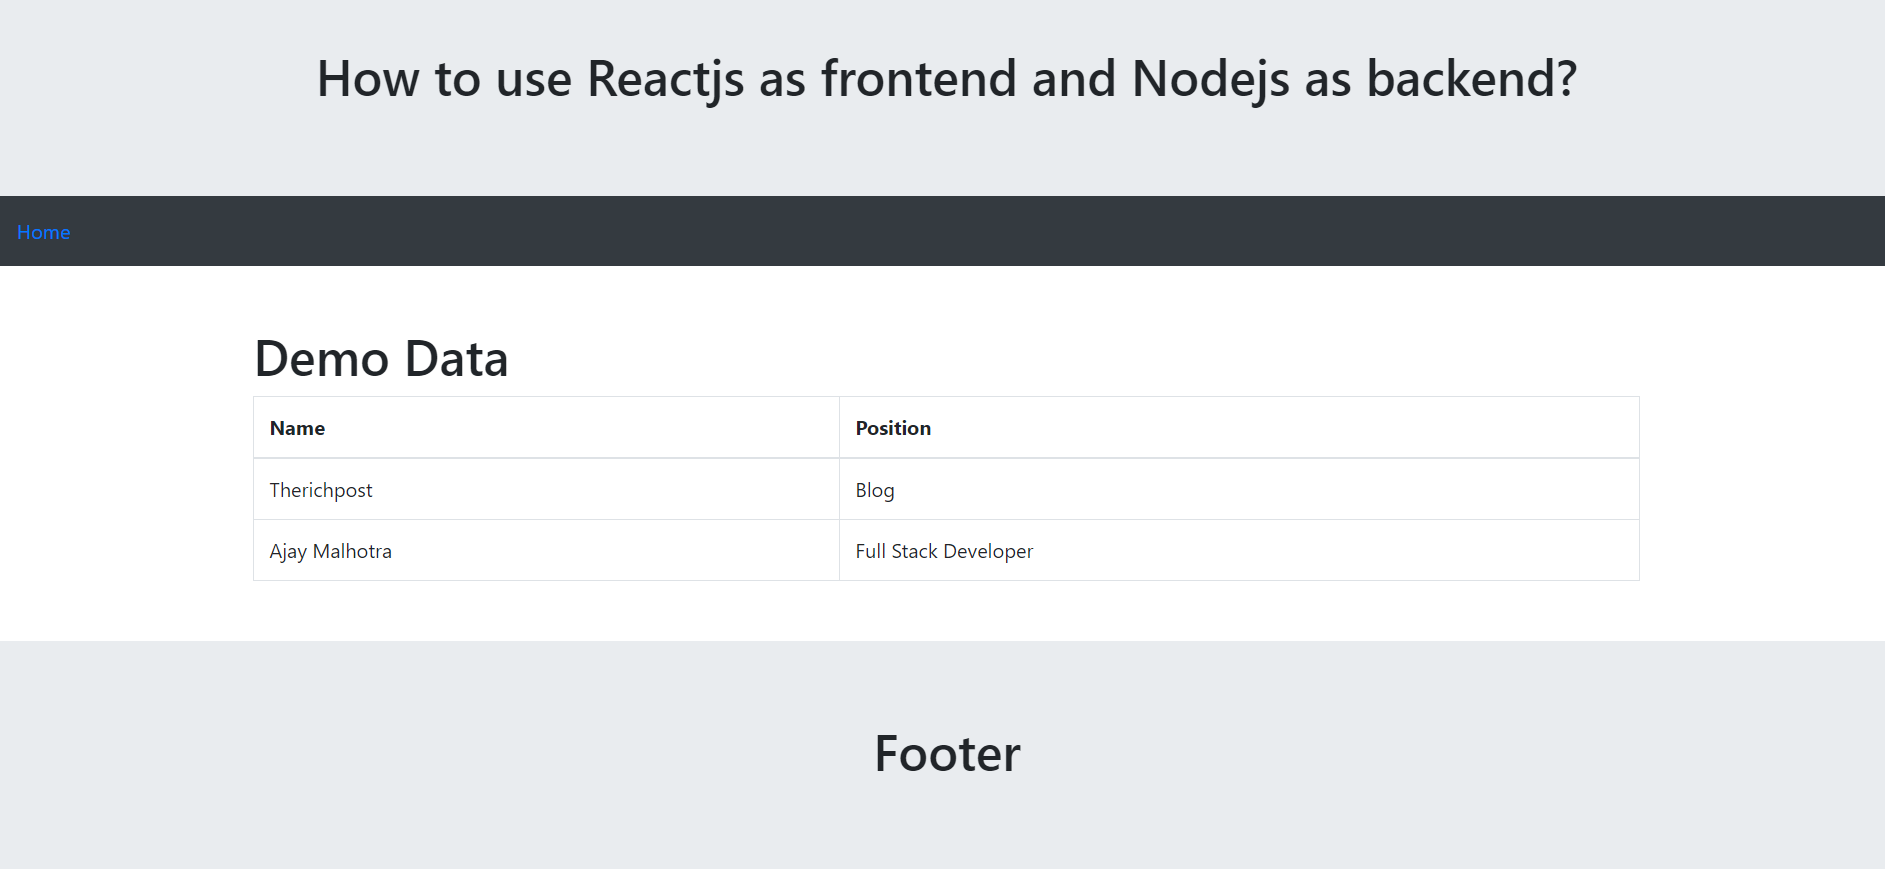 How to use Reactjs as frontend and Nodejs as backend?